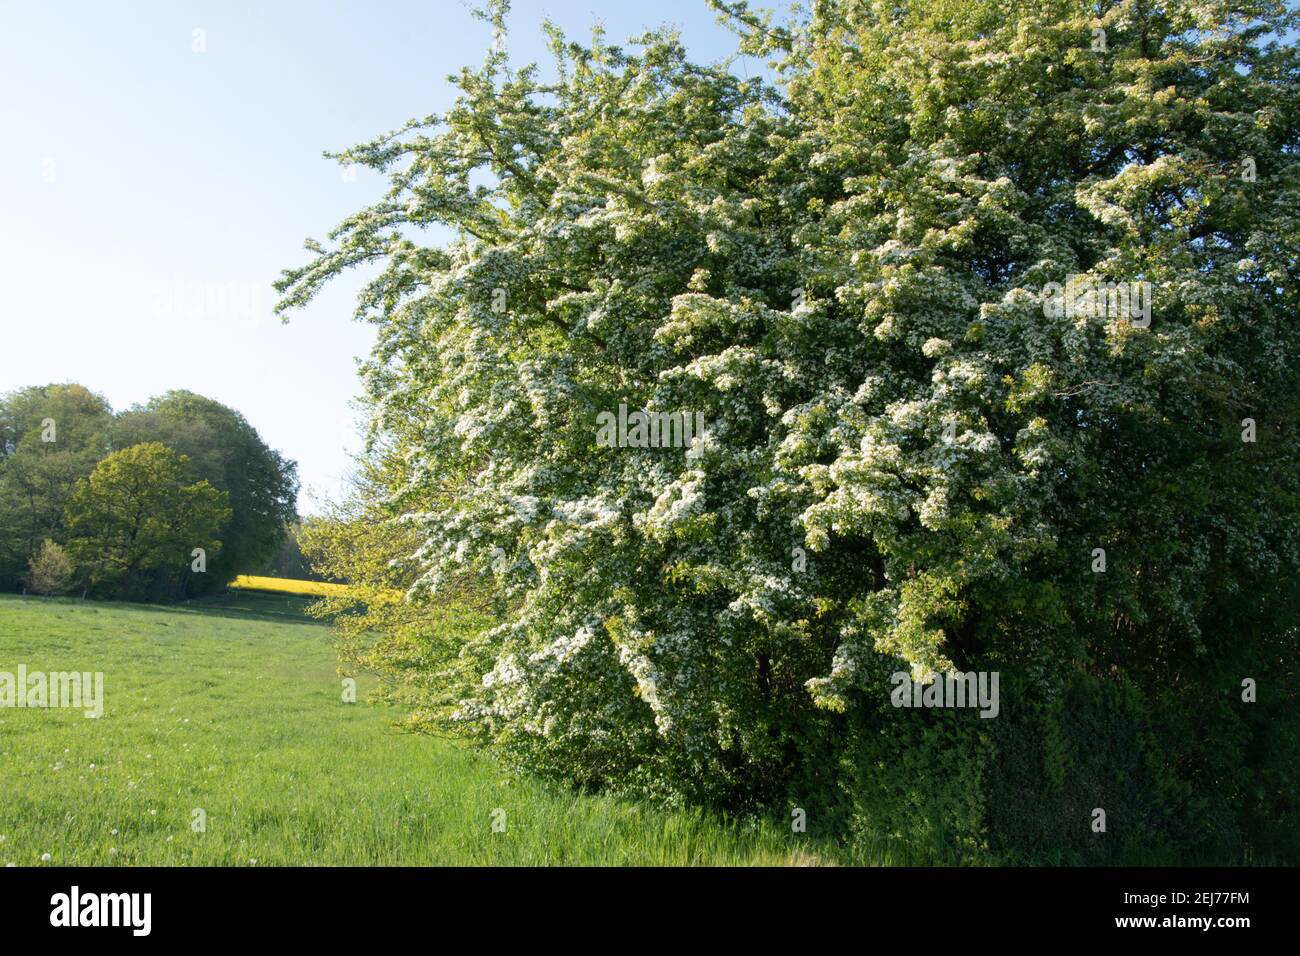 A hedge of blooming hawthorn, Crataegus monogyna, in spring. Hawthorn hedges are easy to care for, dense, robust and of high ecological value. Stock Photo